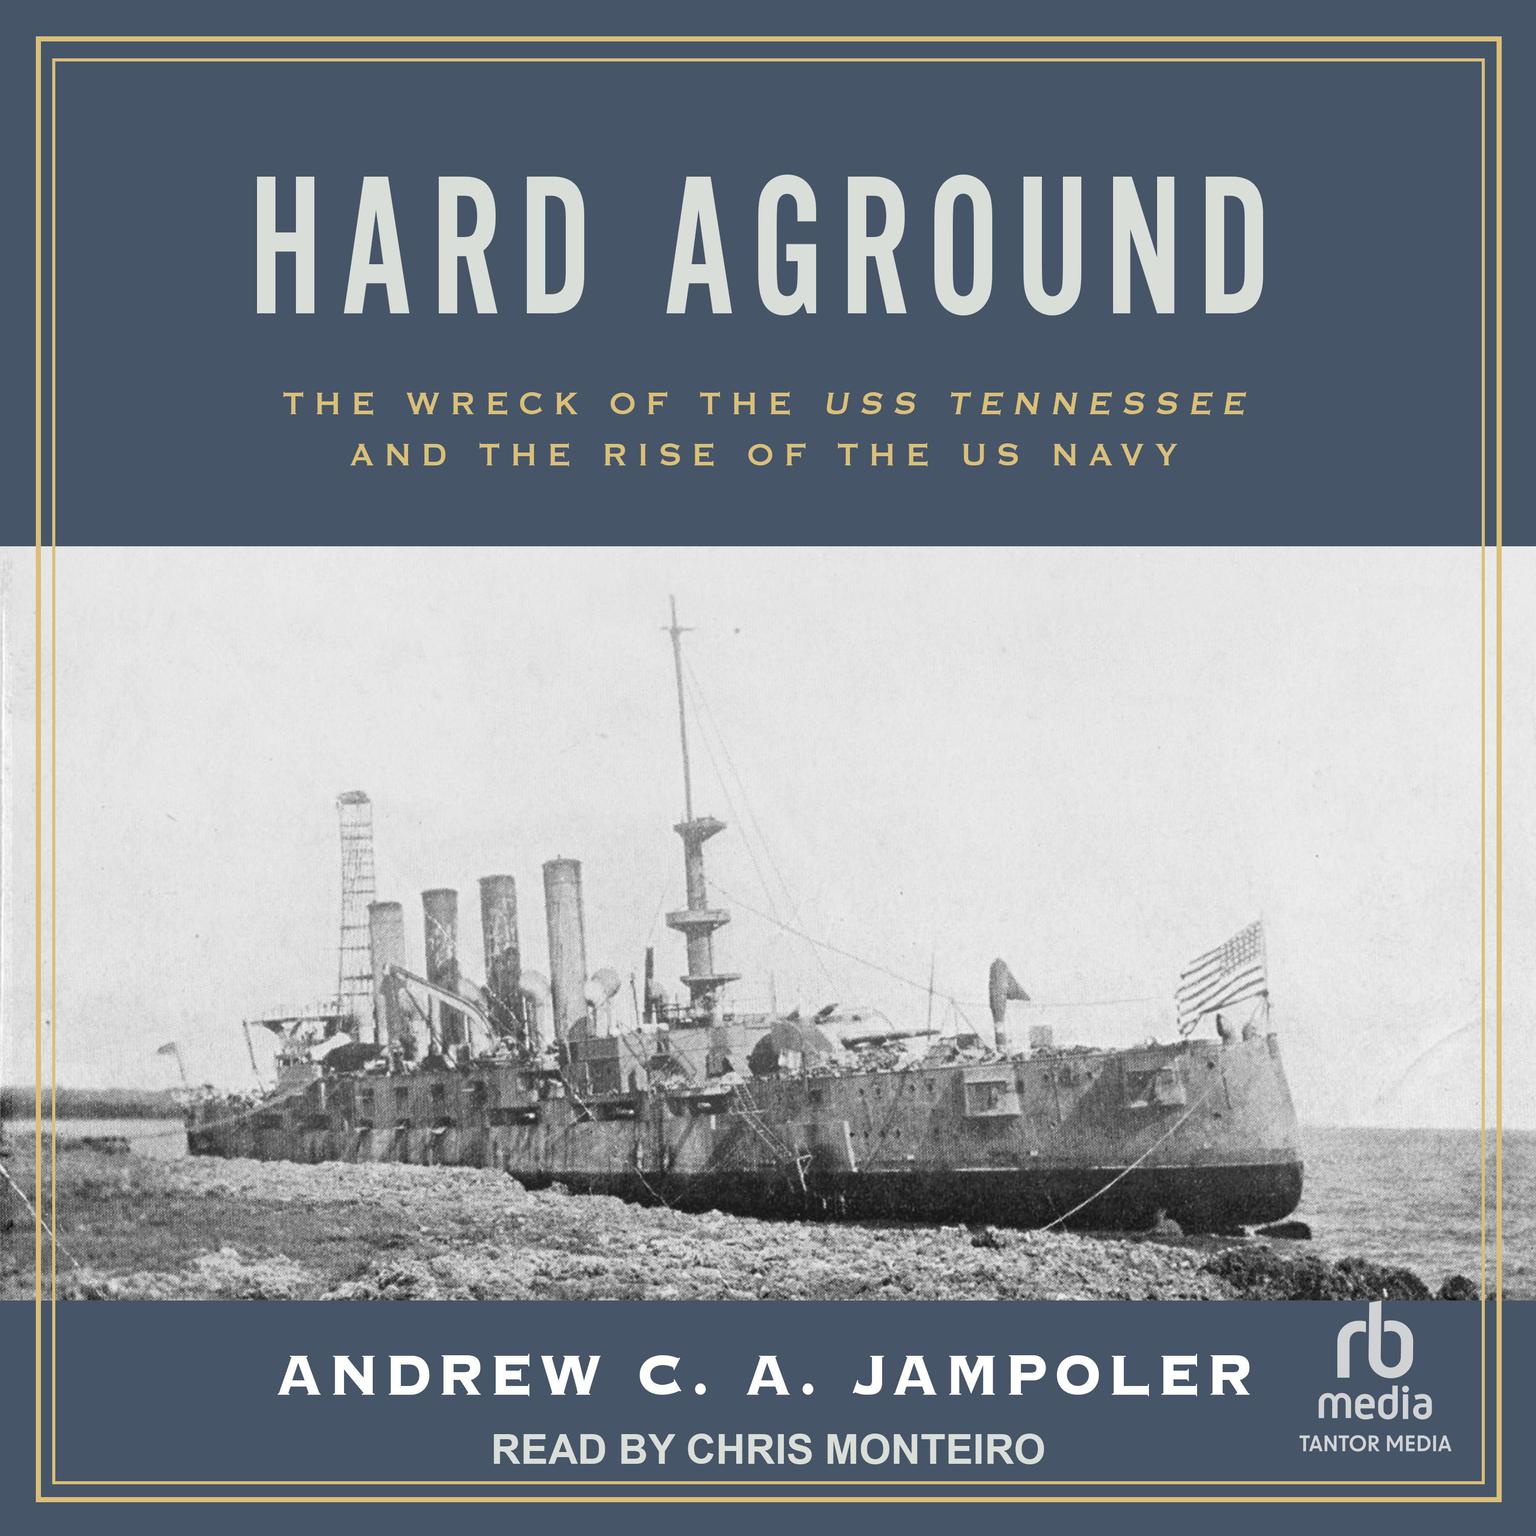 Hard Aground: The Wreck of the USS Tennessee and the Rise of the US Navy Audiobook, by Andrew C. A. Jampoler